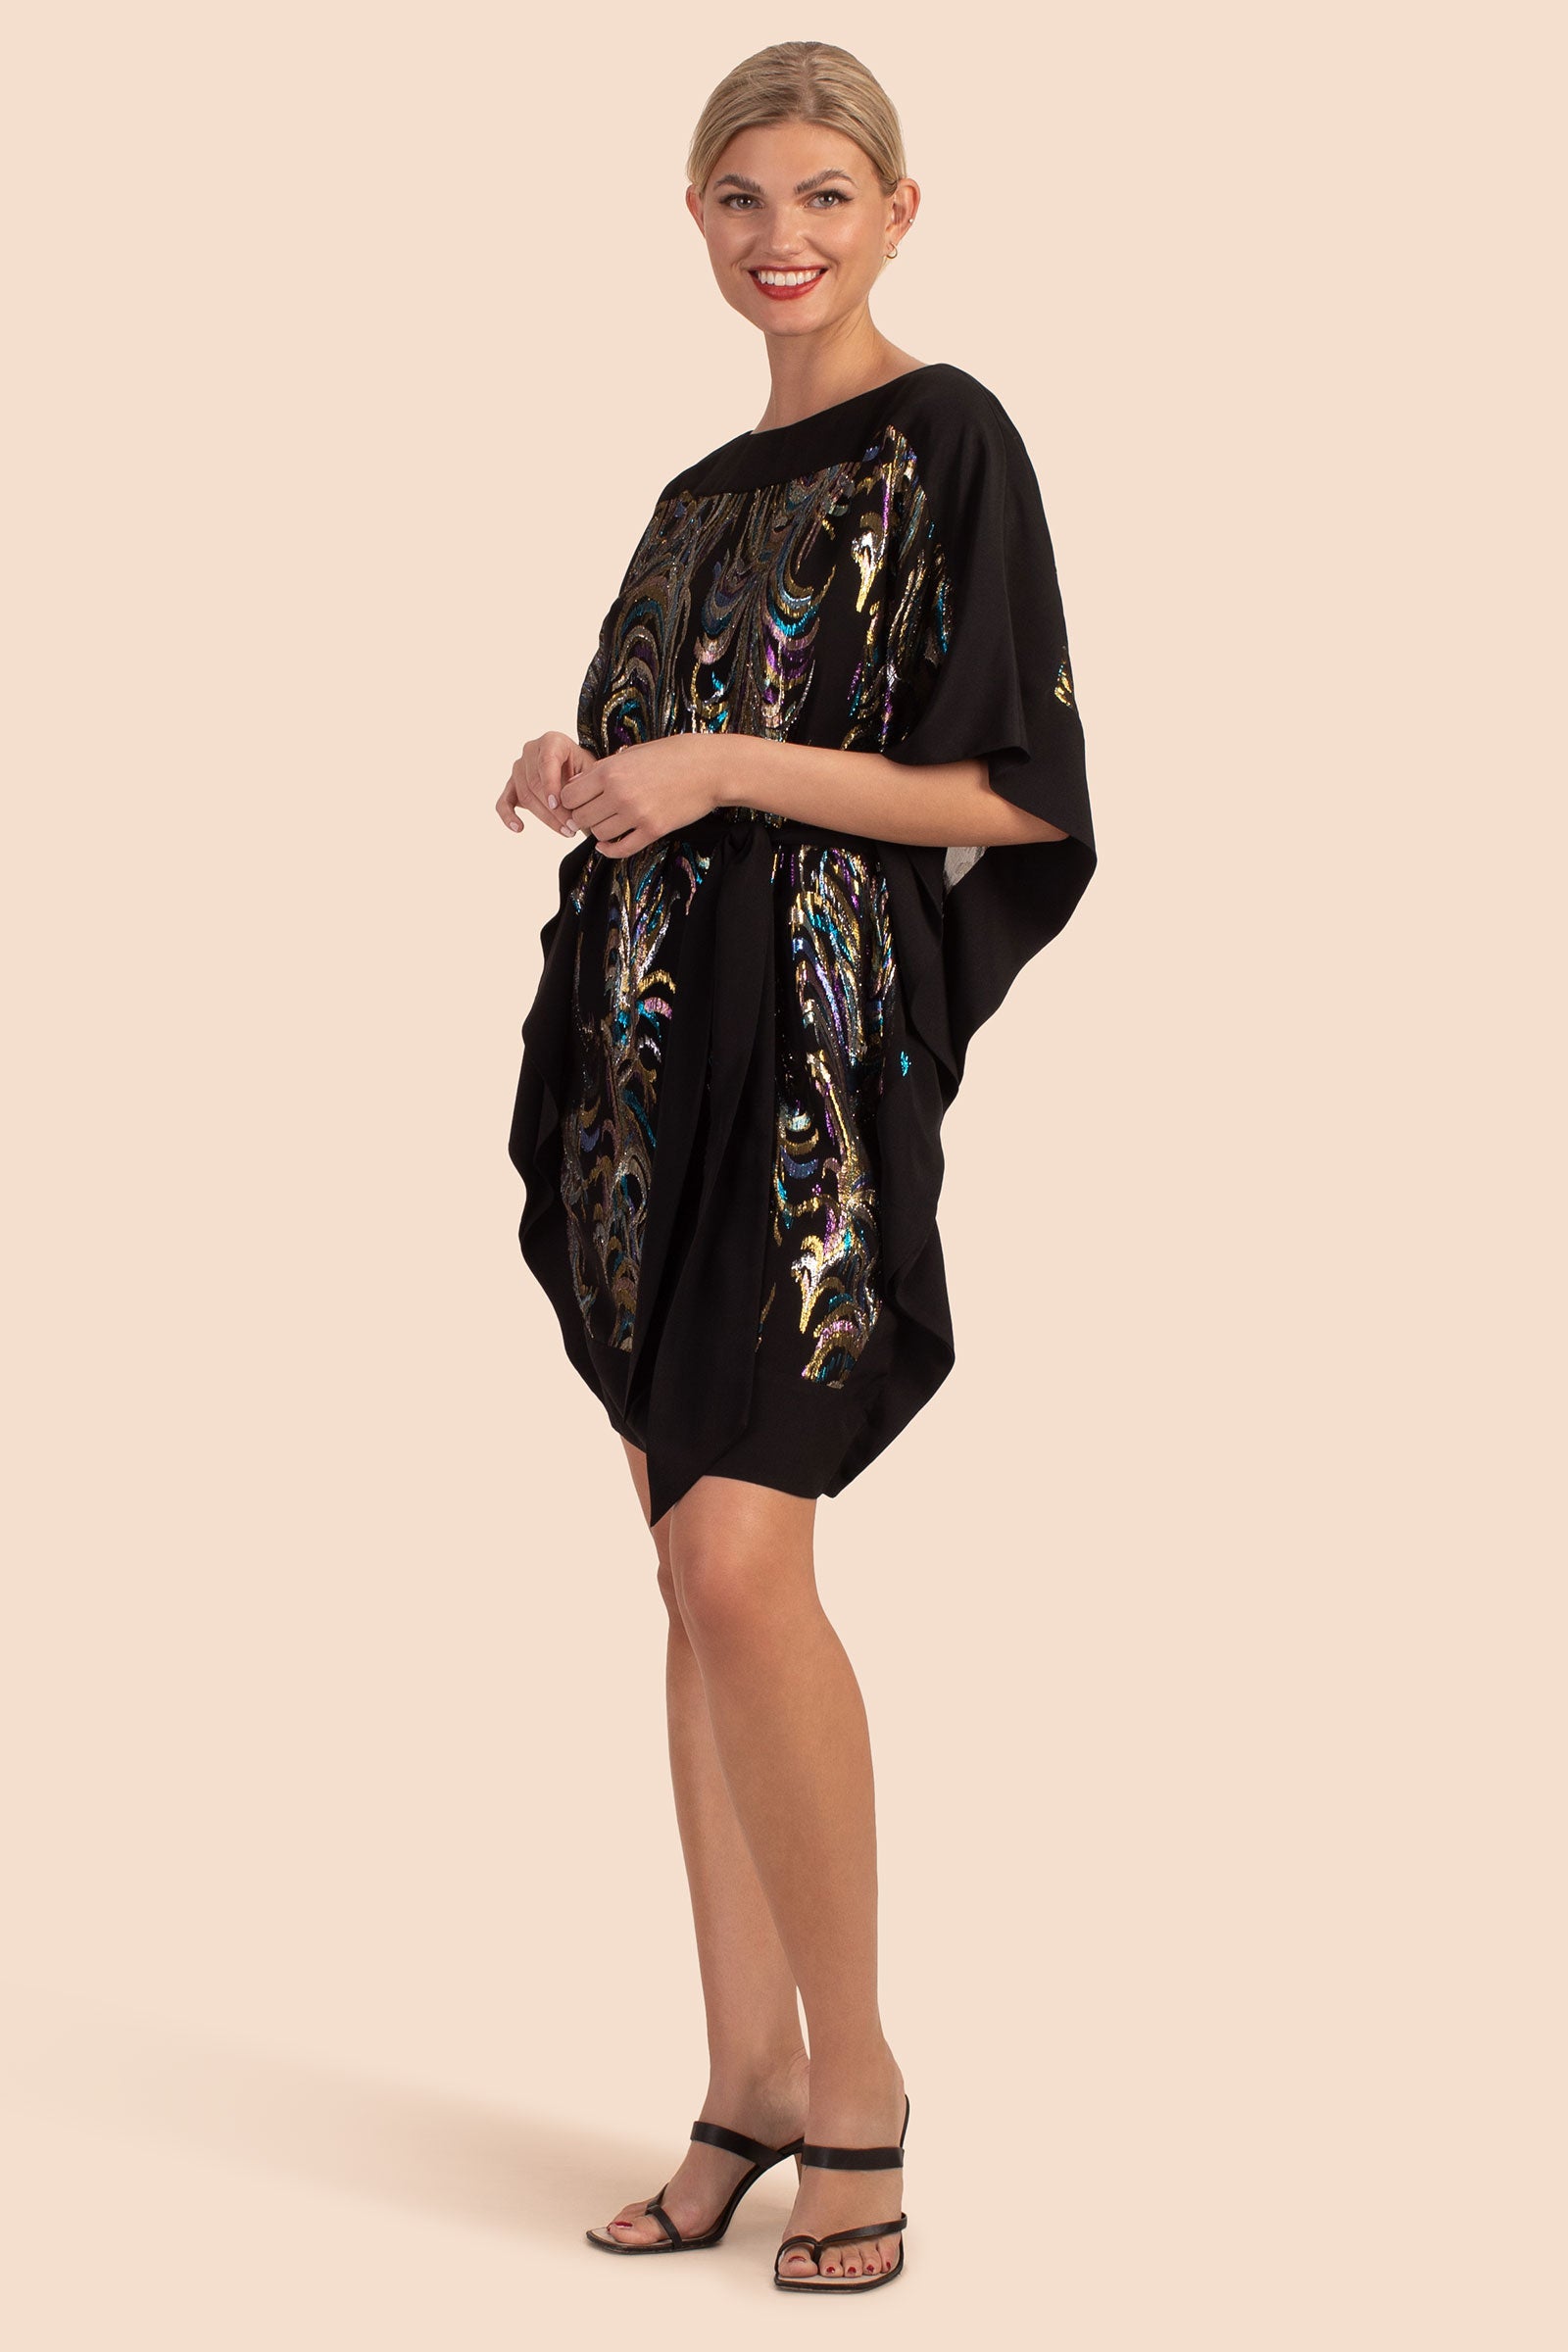 Buy Women winter Turkey dress by Goody Africollections on